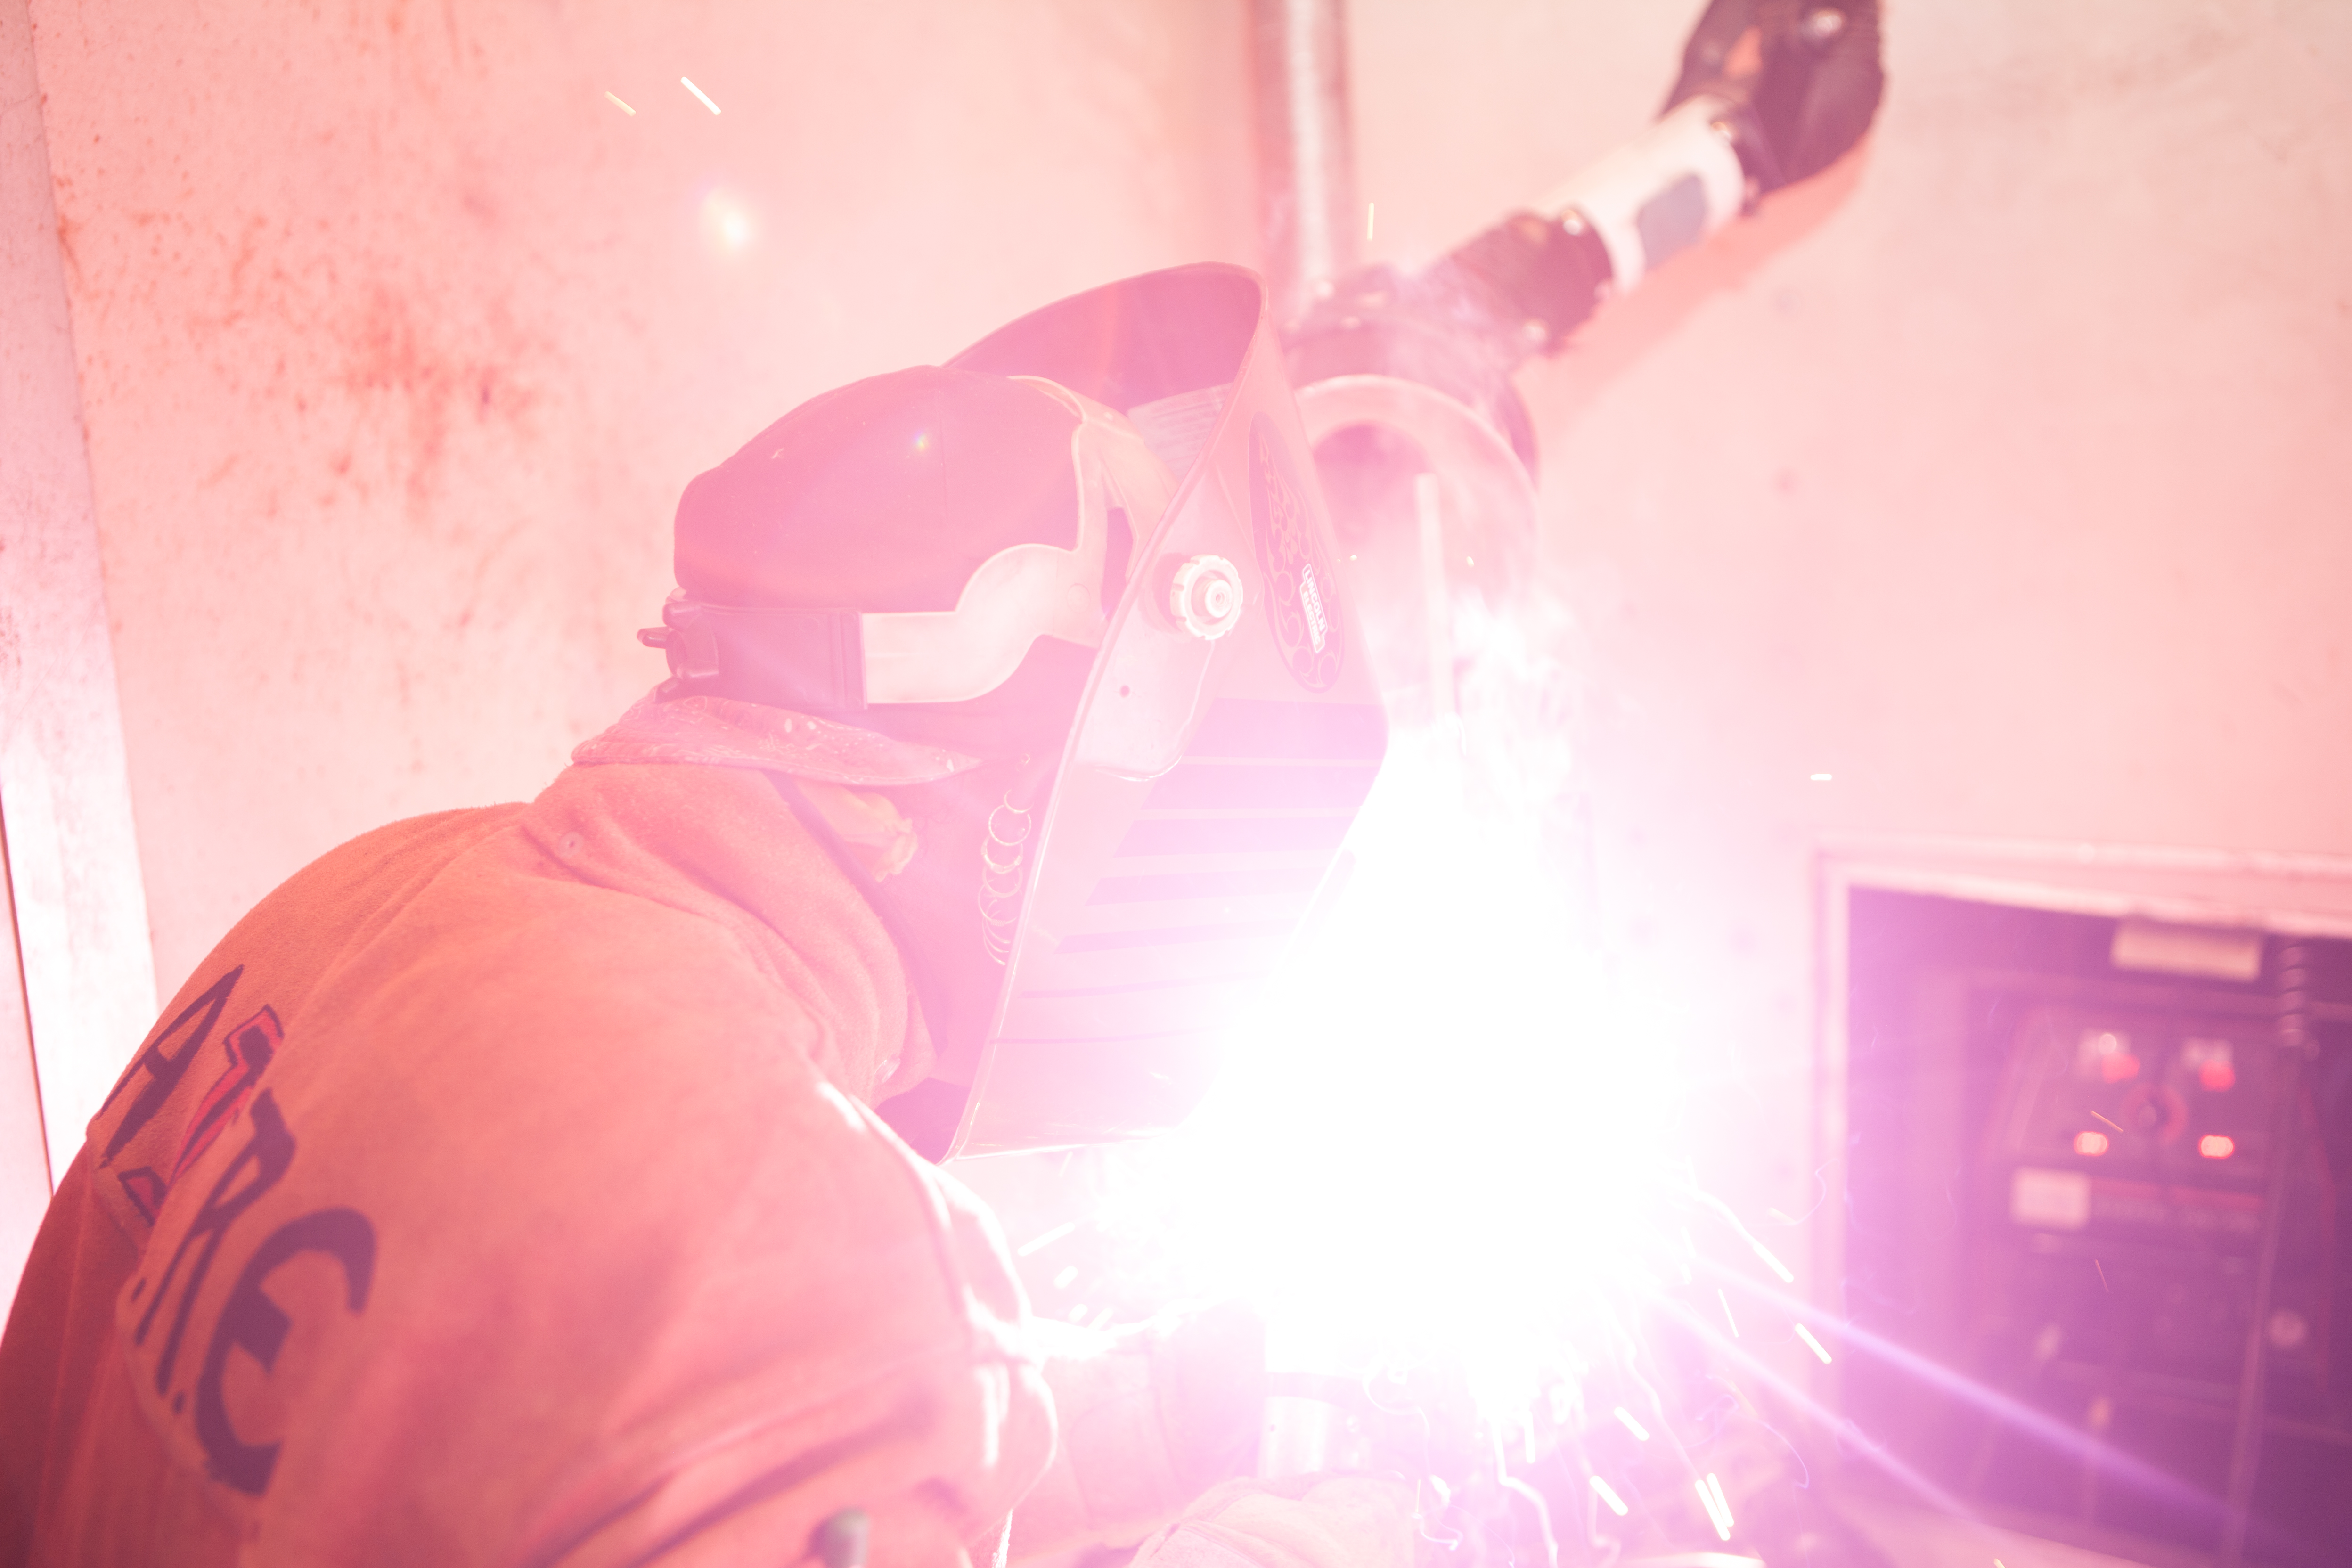 Man Welding with a Safety Mask